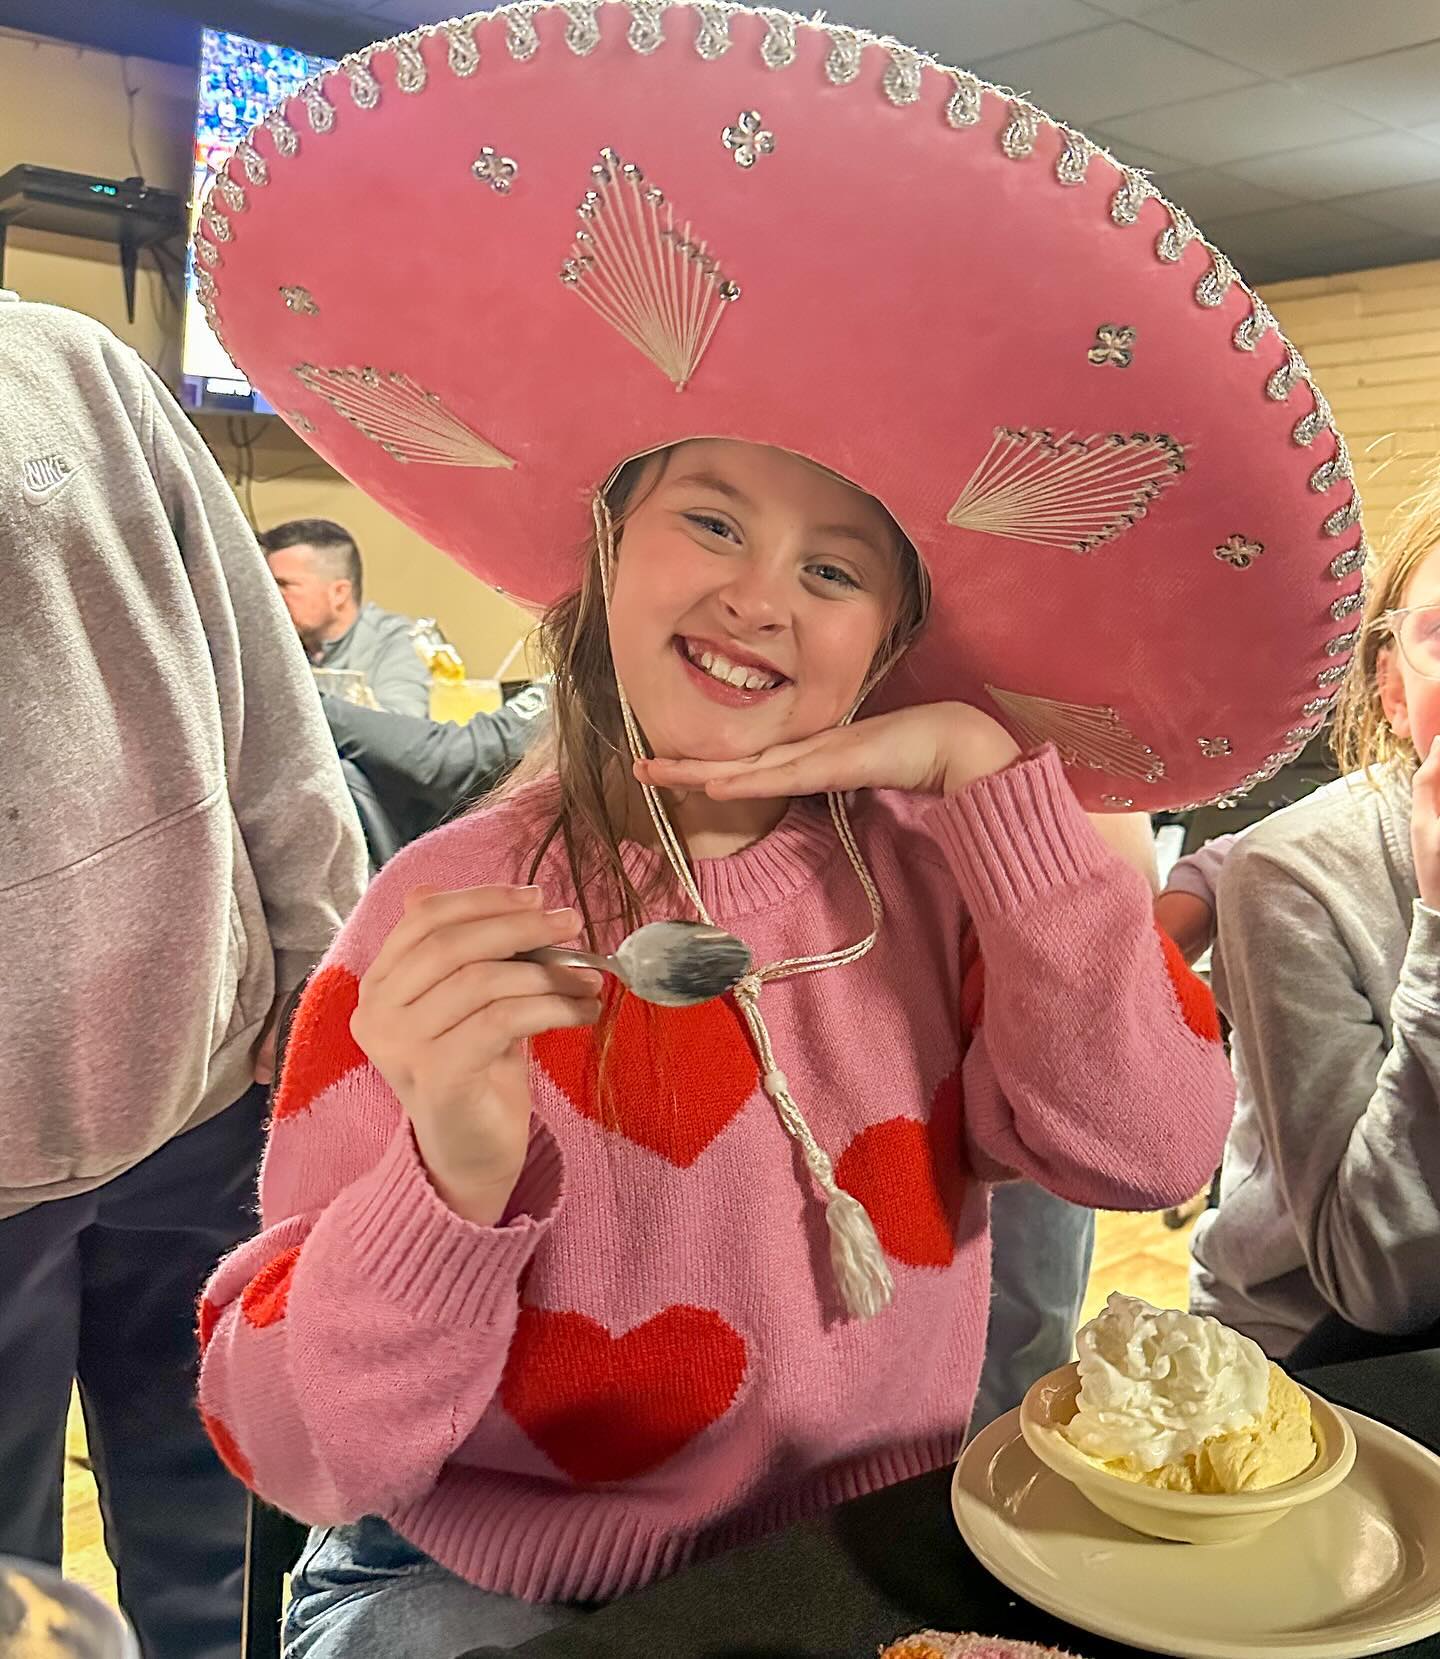 Leah Messer's daughter Addie recently celebrated her 11th birthday